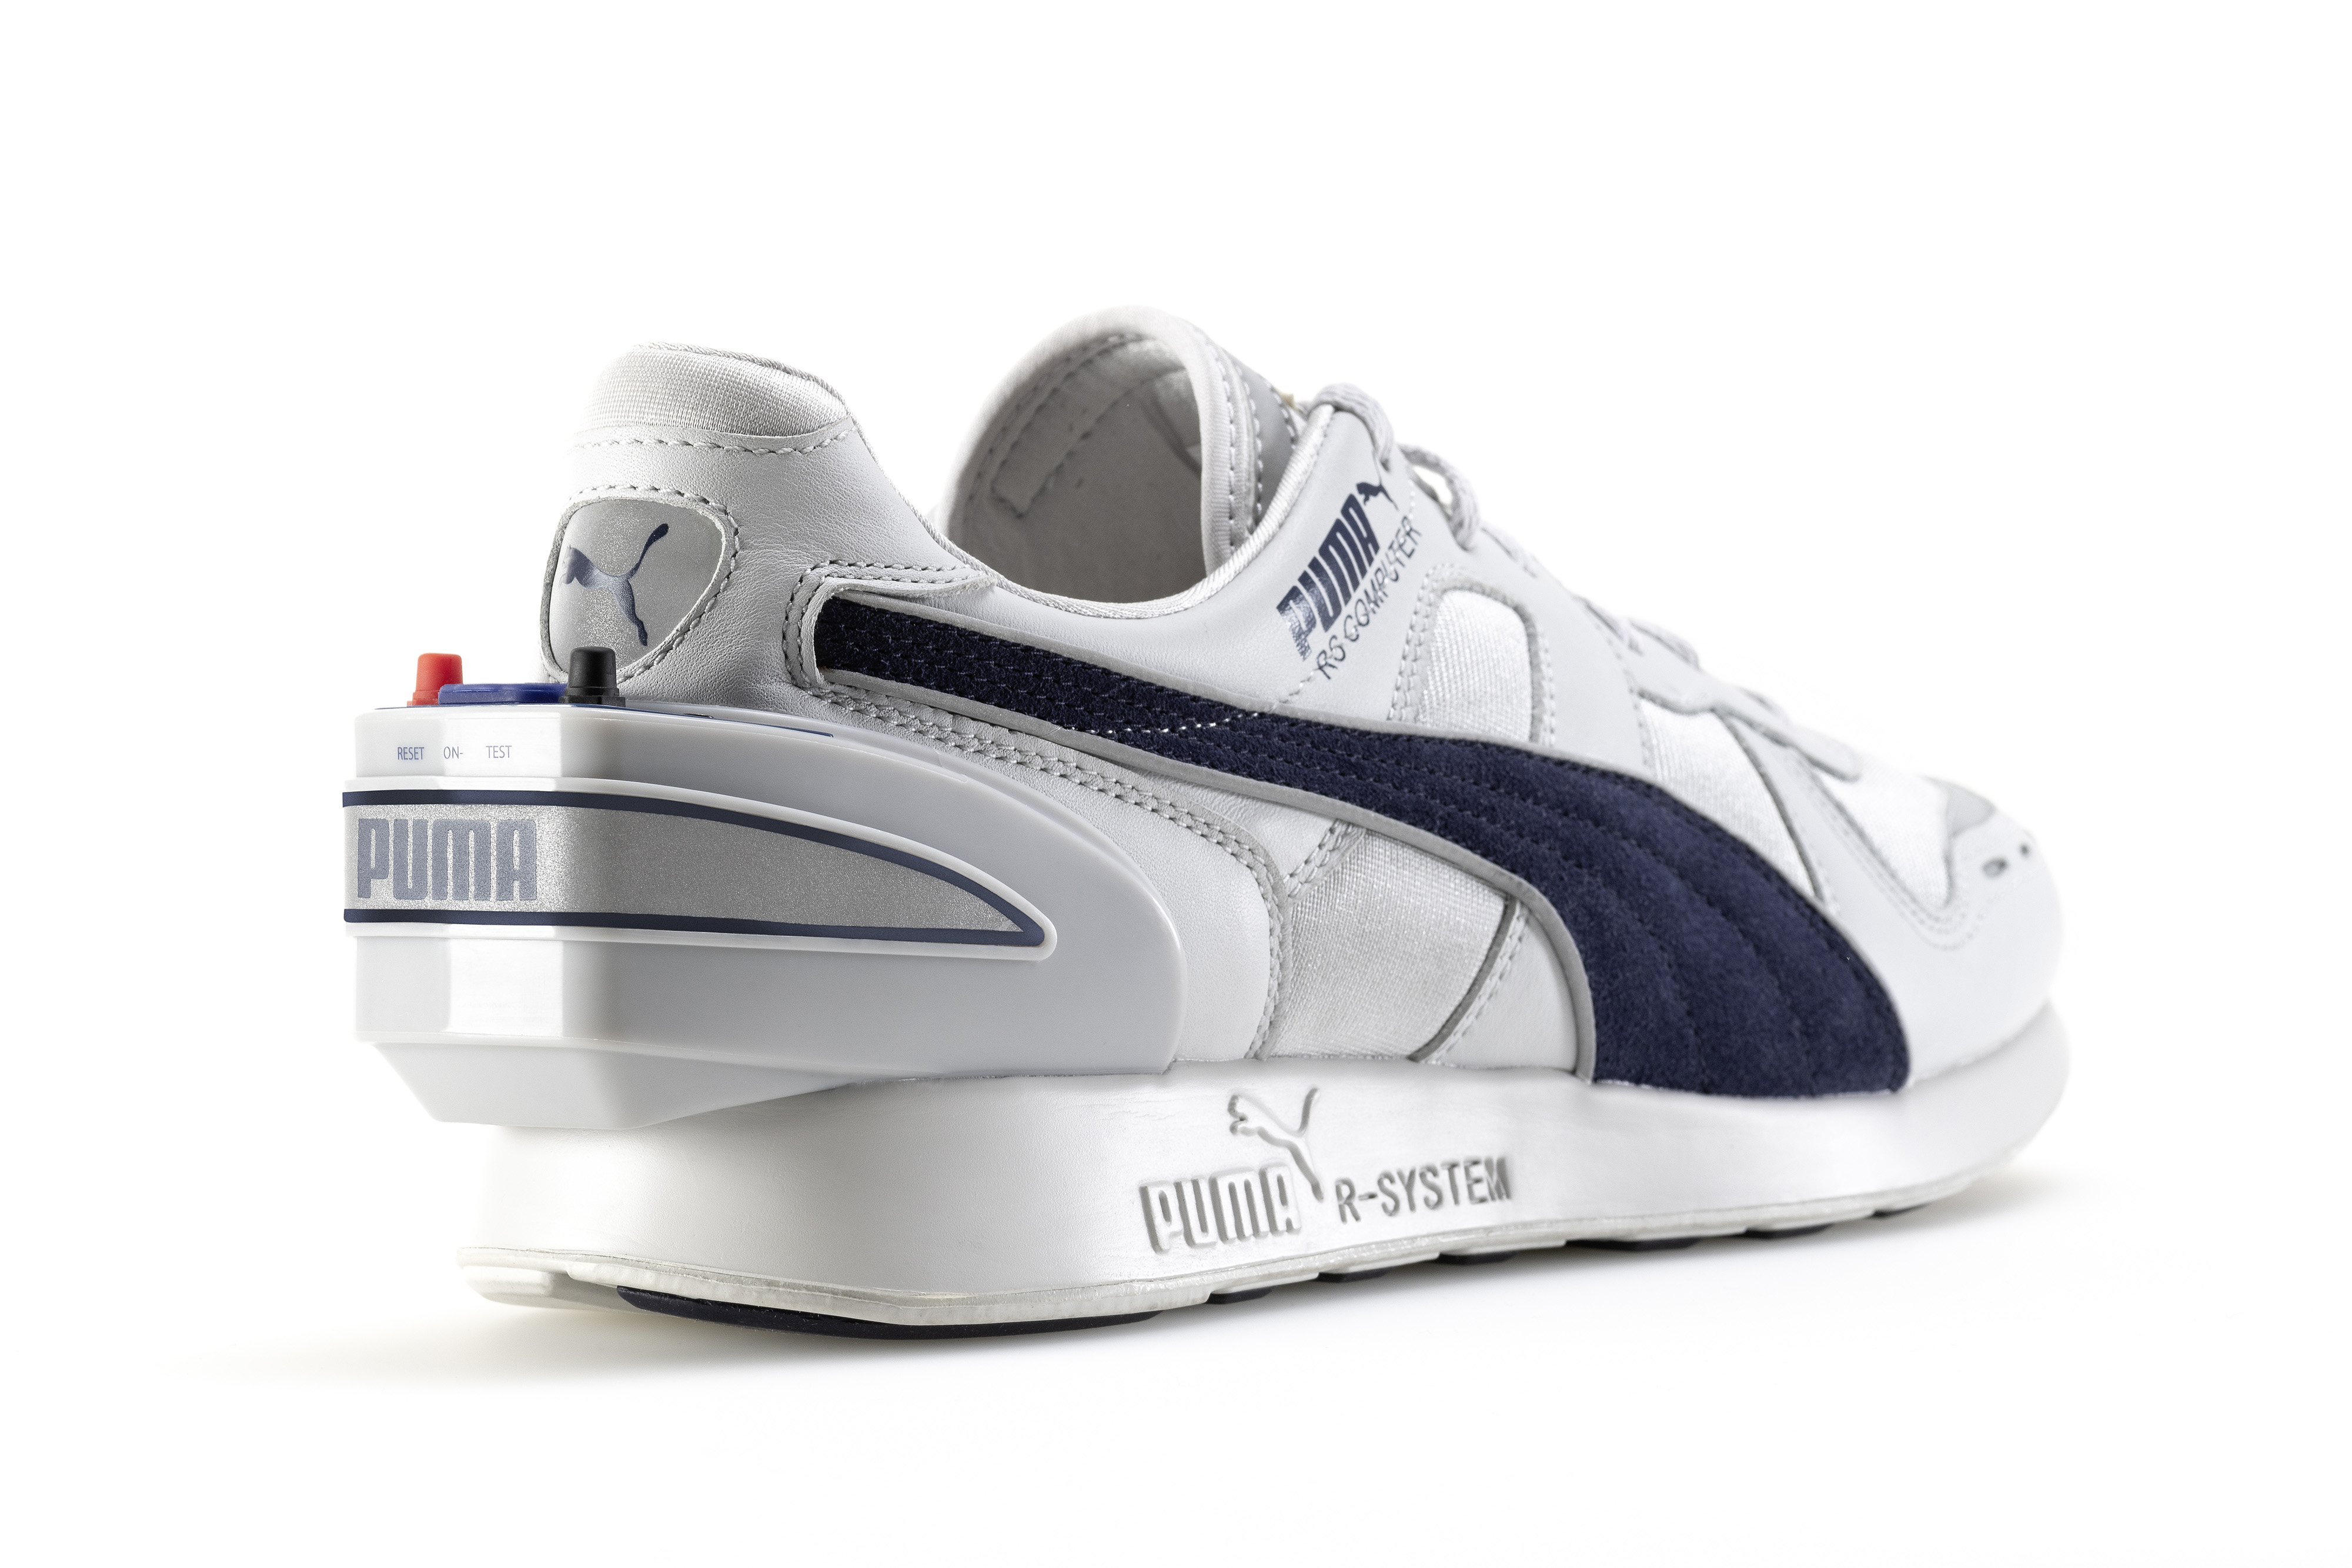 Puma Goes Back to the With Computerized Shoes - Bloomberg